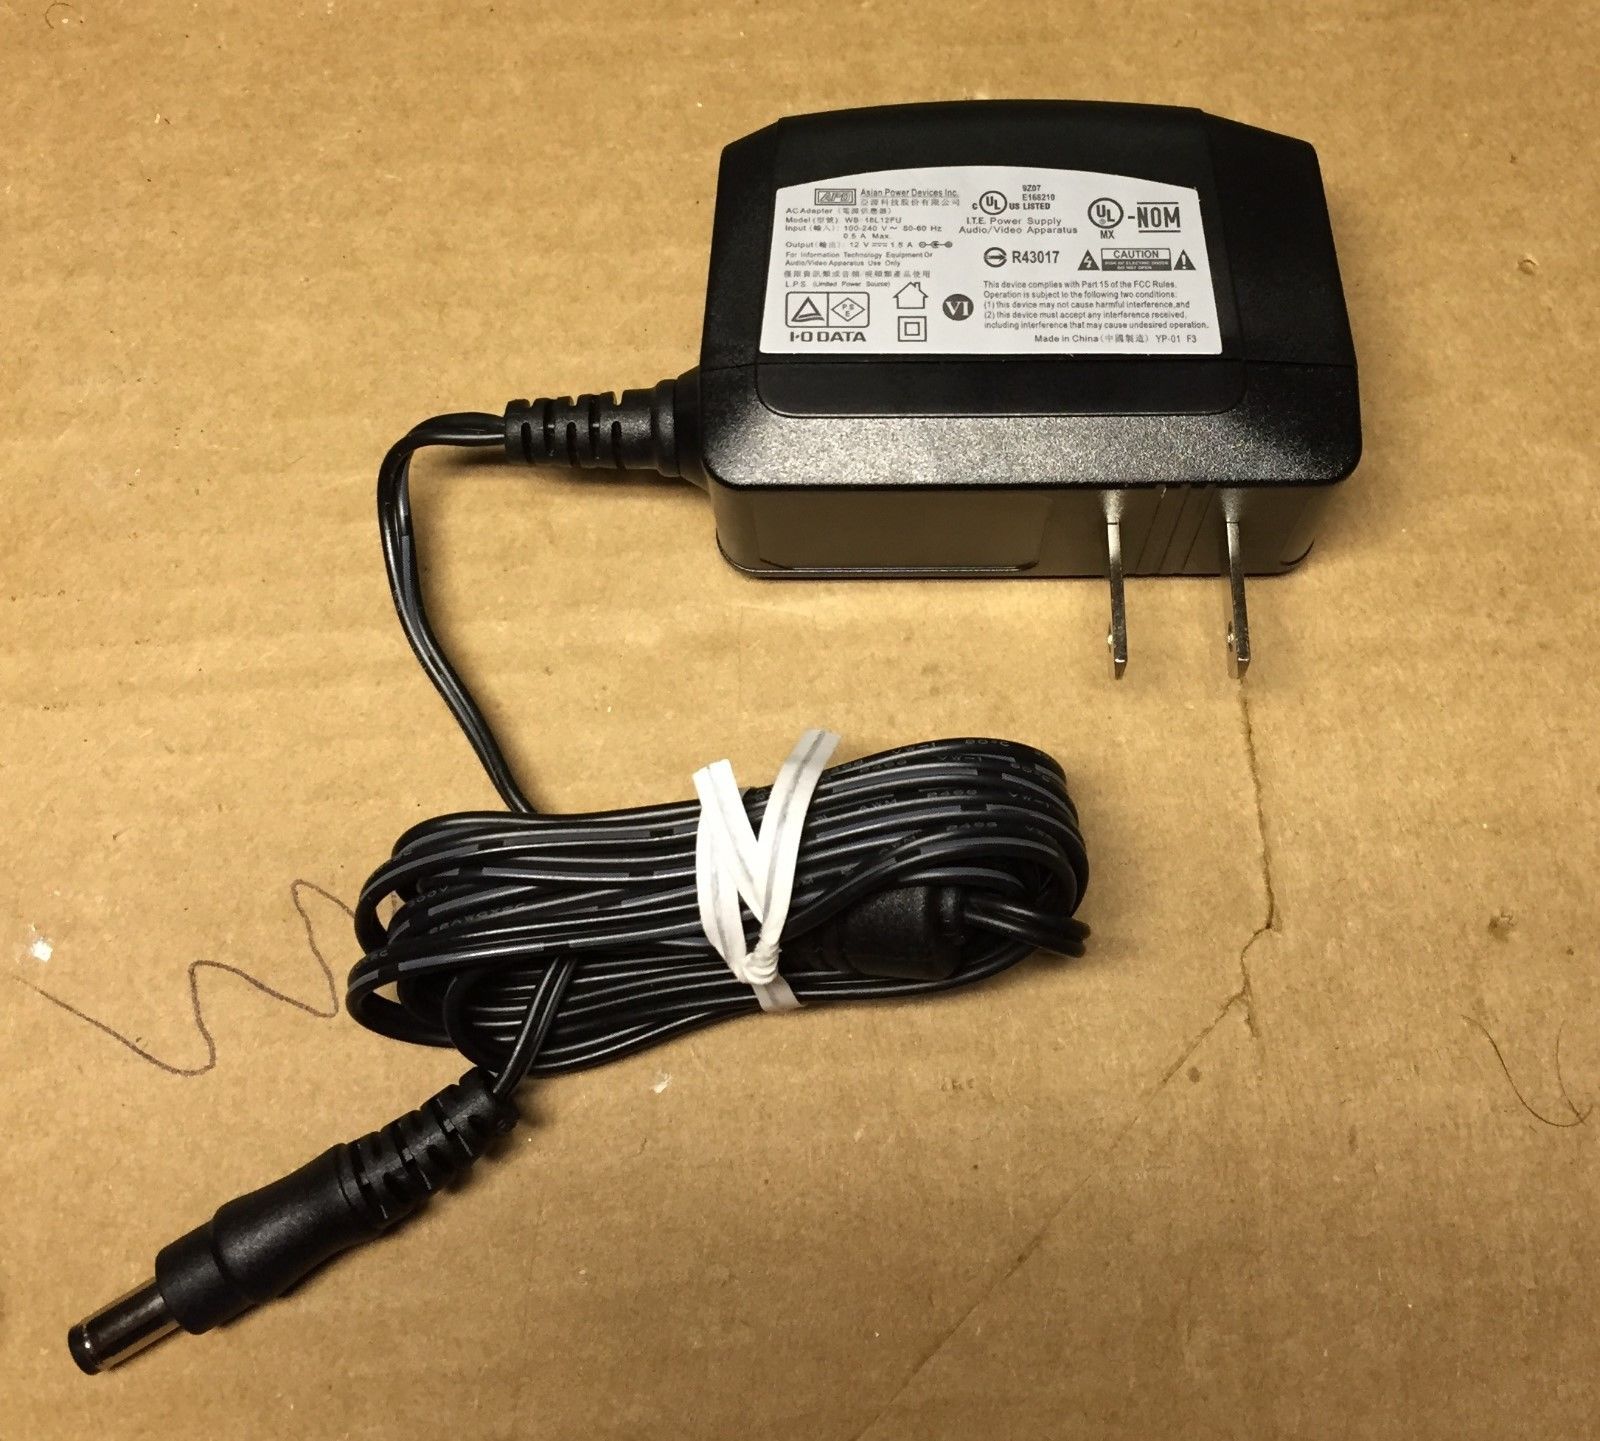 *Brand NEW*12V 1.5A 120-240V 50-60Hz WB-18L12FU APD Asian Power Devices Inc US AC Adapter